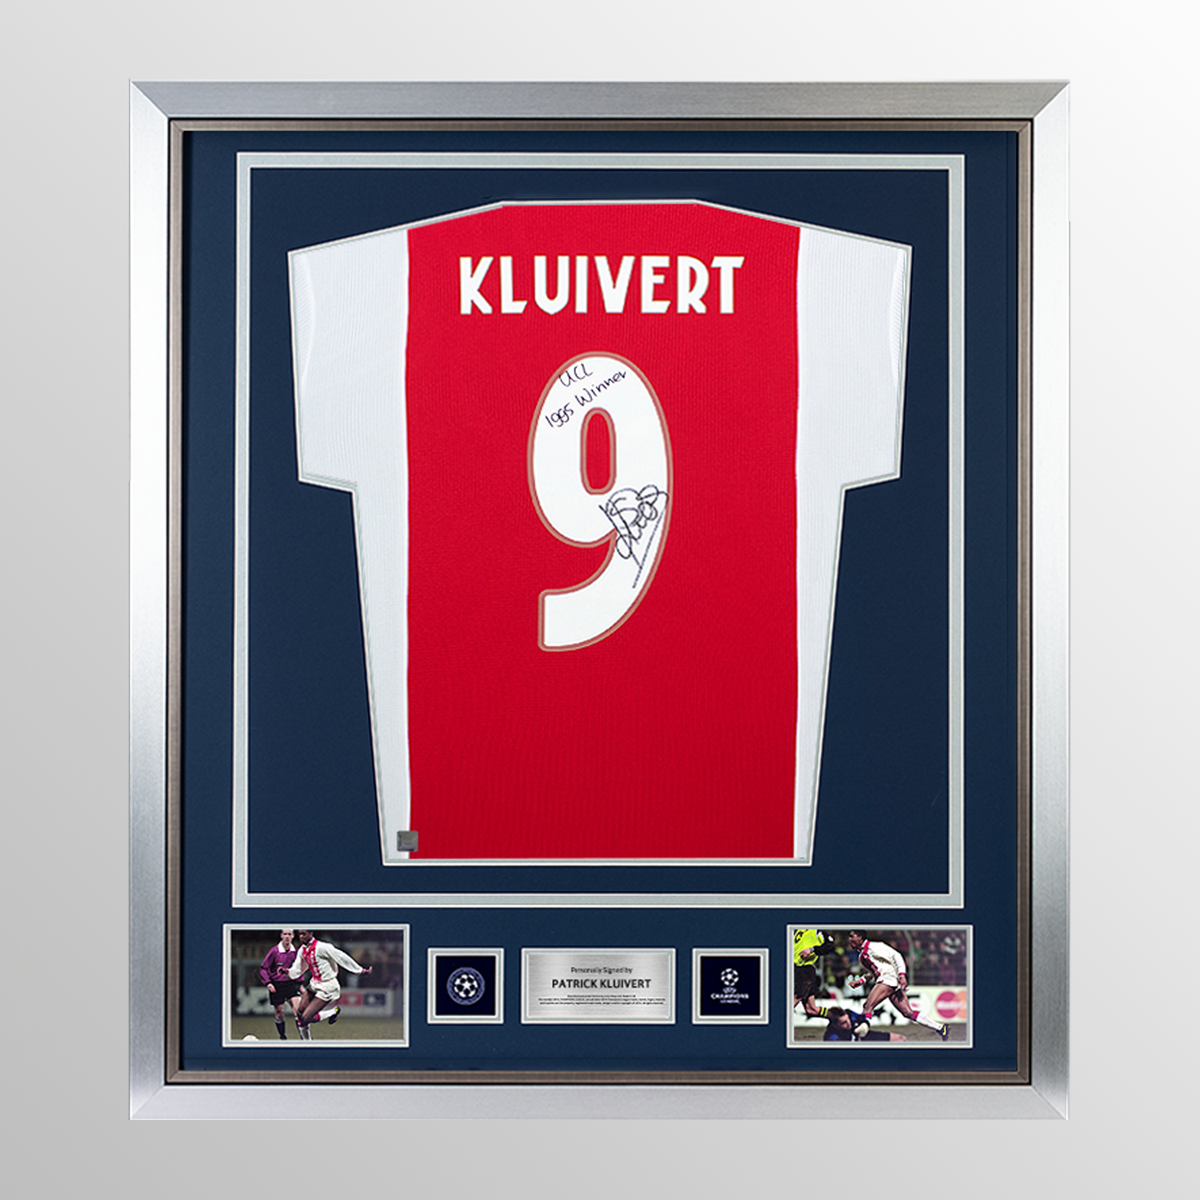 Patrick Kluivert Official UEFA Champions League Back Signed and Framed Modern AFC Ajax Home Shirt: 1995 UCL Winner Edition UEFA Club Competitions Online Store